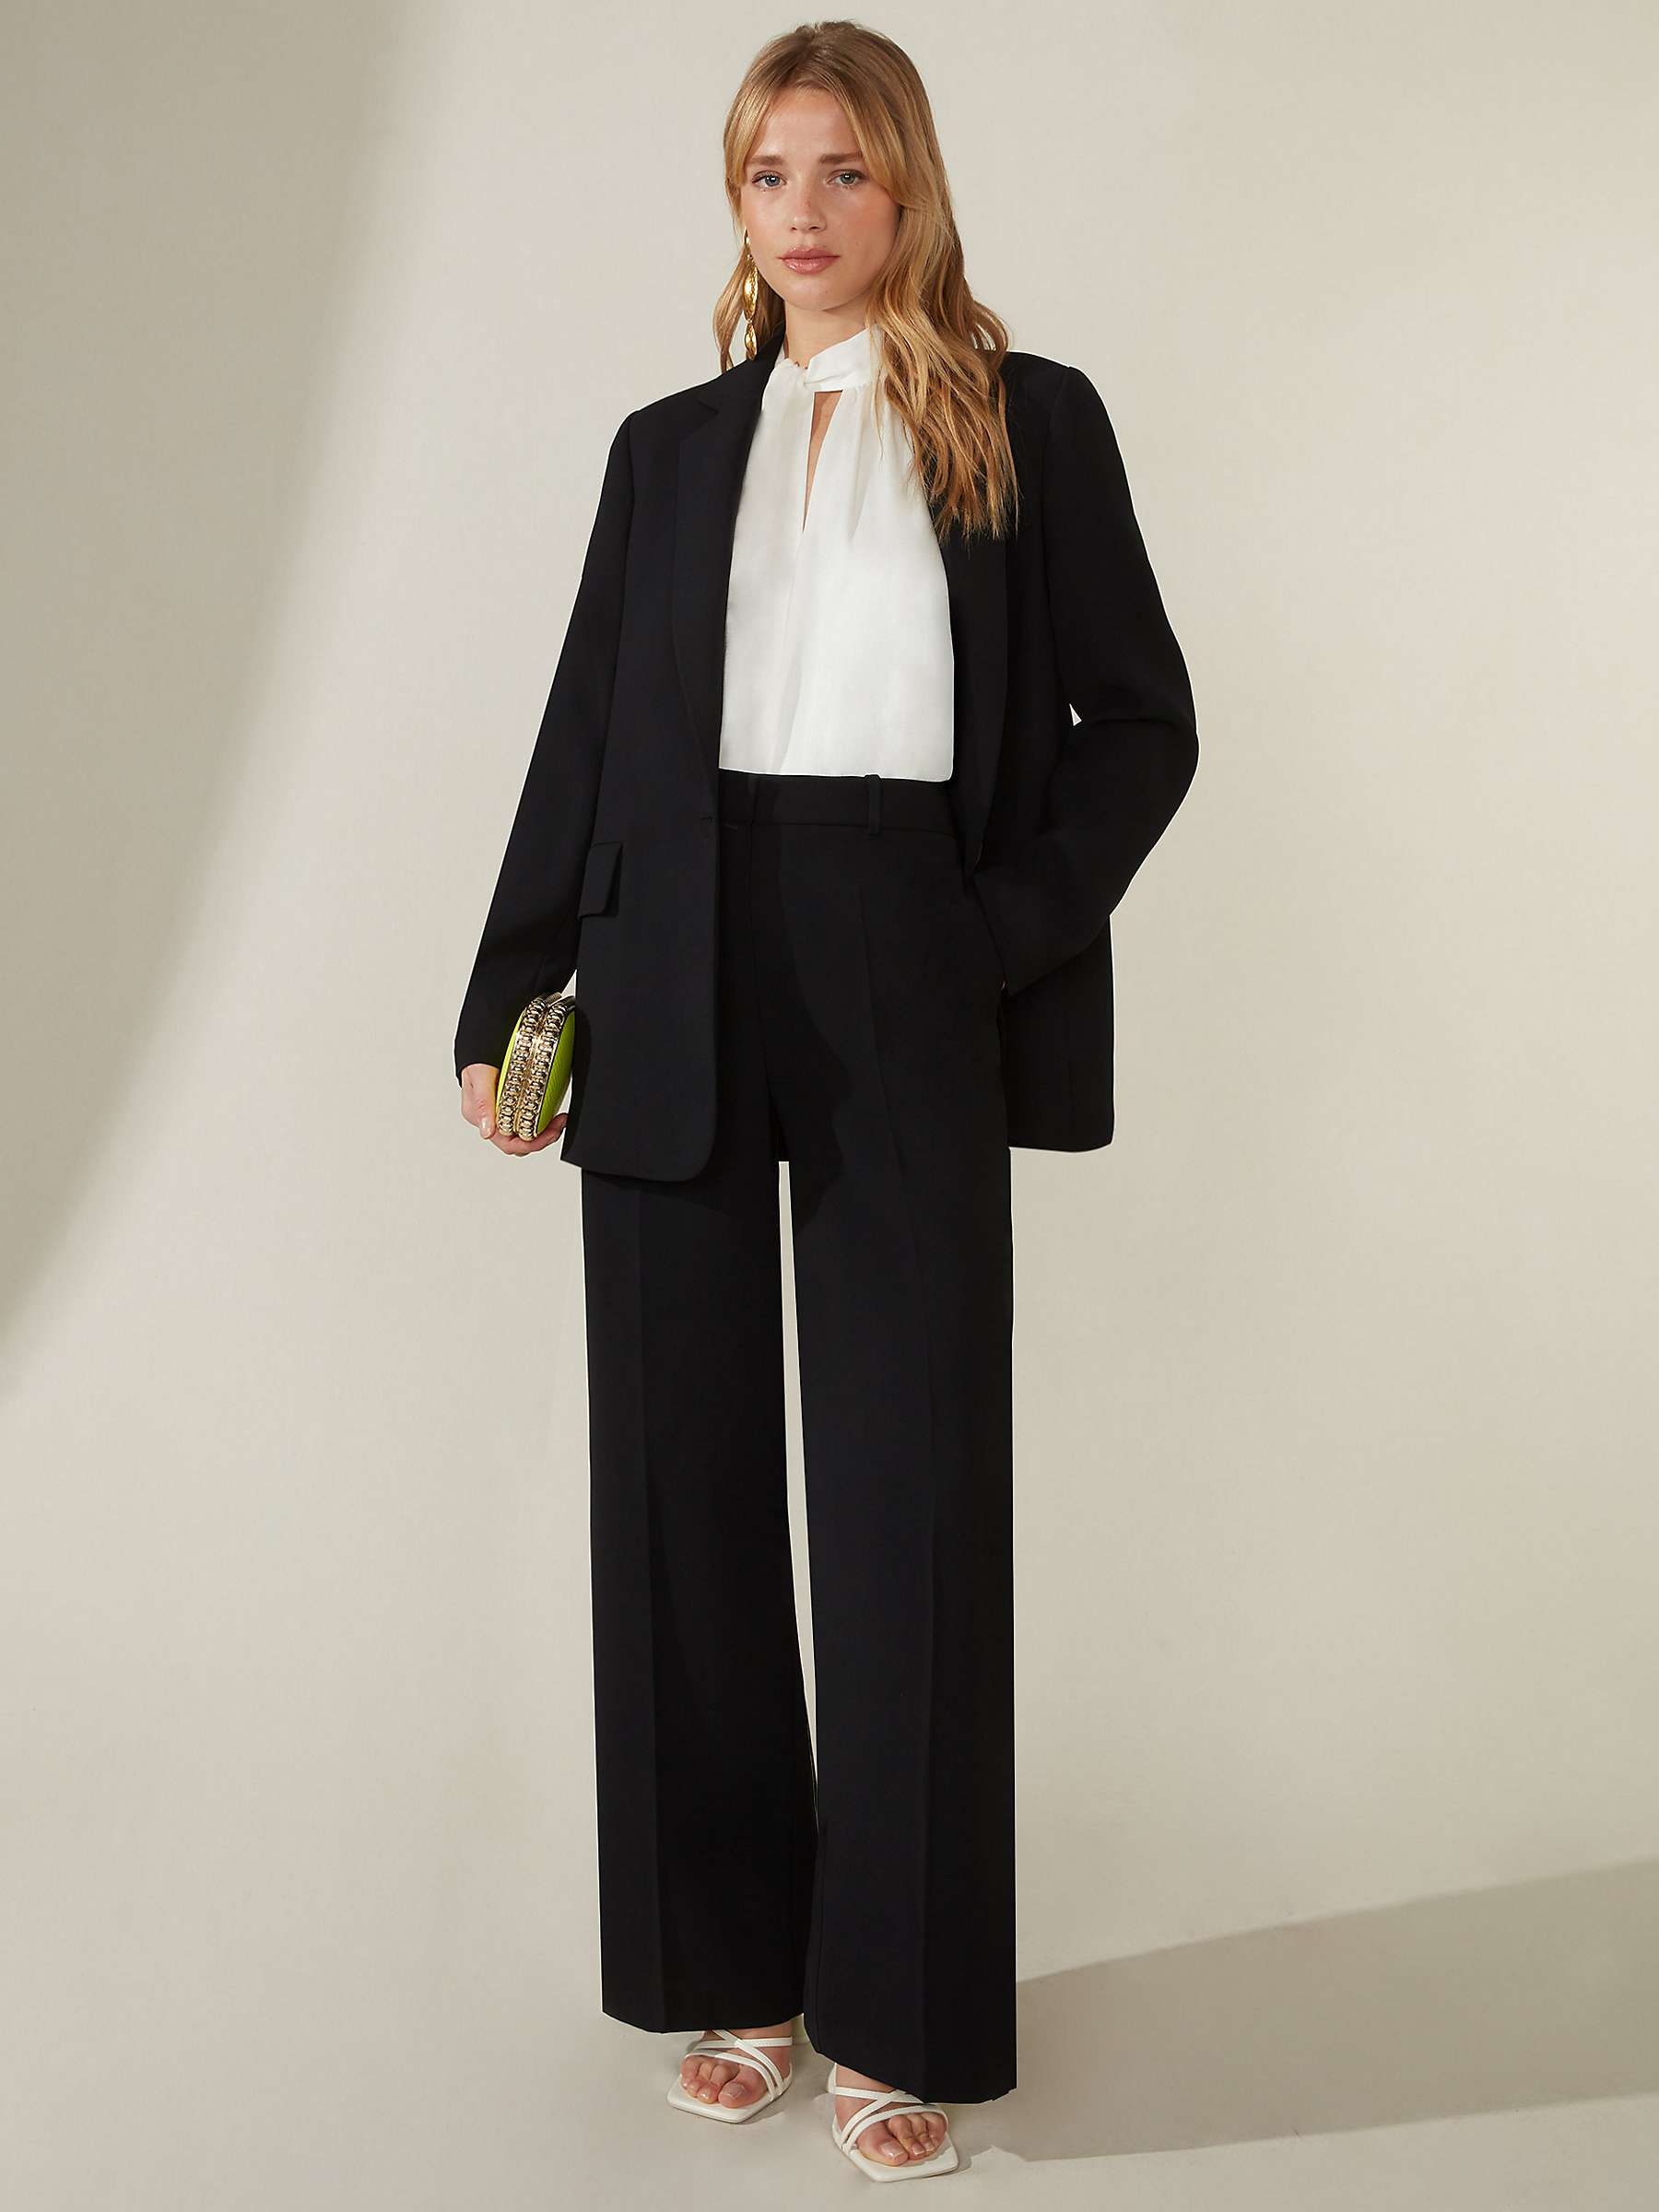 Buy Ro&Zo Tailored Single Breasted Blazer Online at johnlewis.com